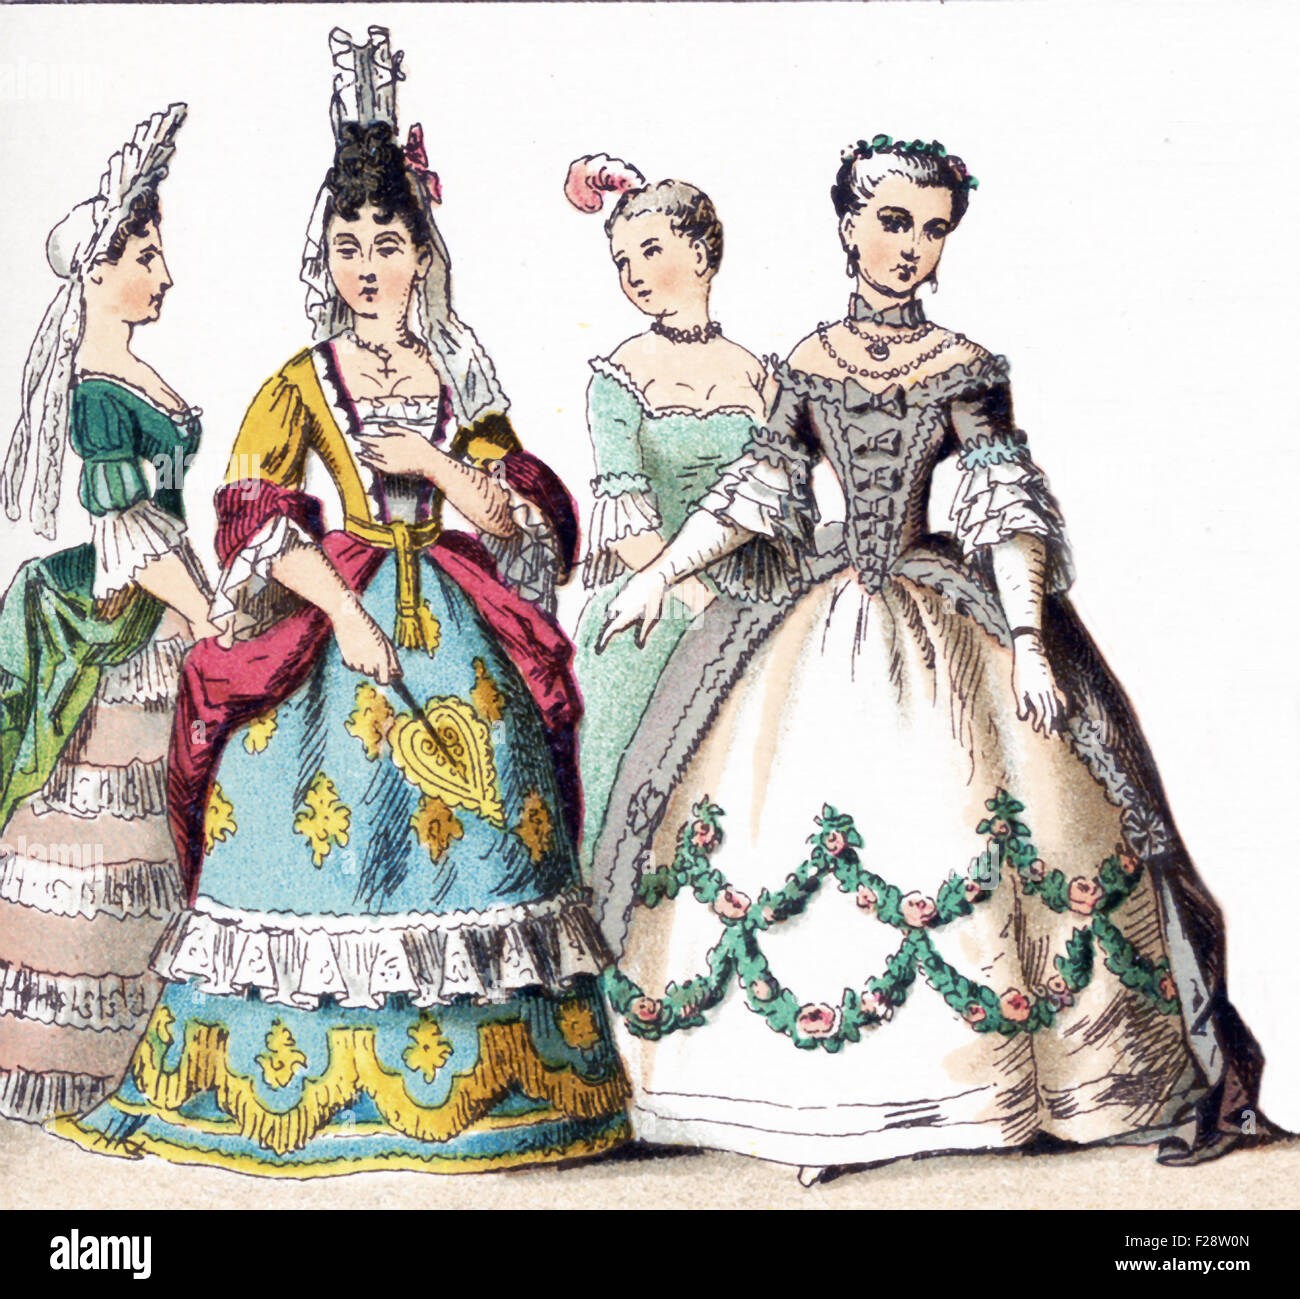 The figures illustrated here represent French ladies of rank—upper class women—between 1700 and 1750. The illustration dates to 1882. Stock Photo